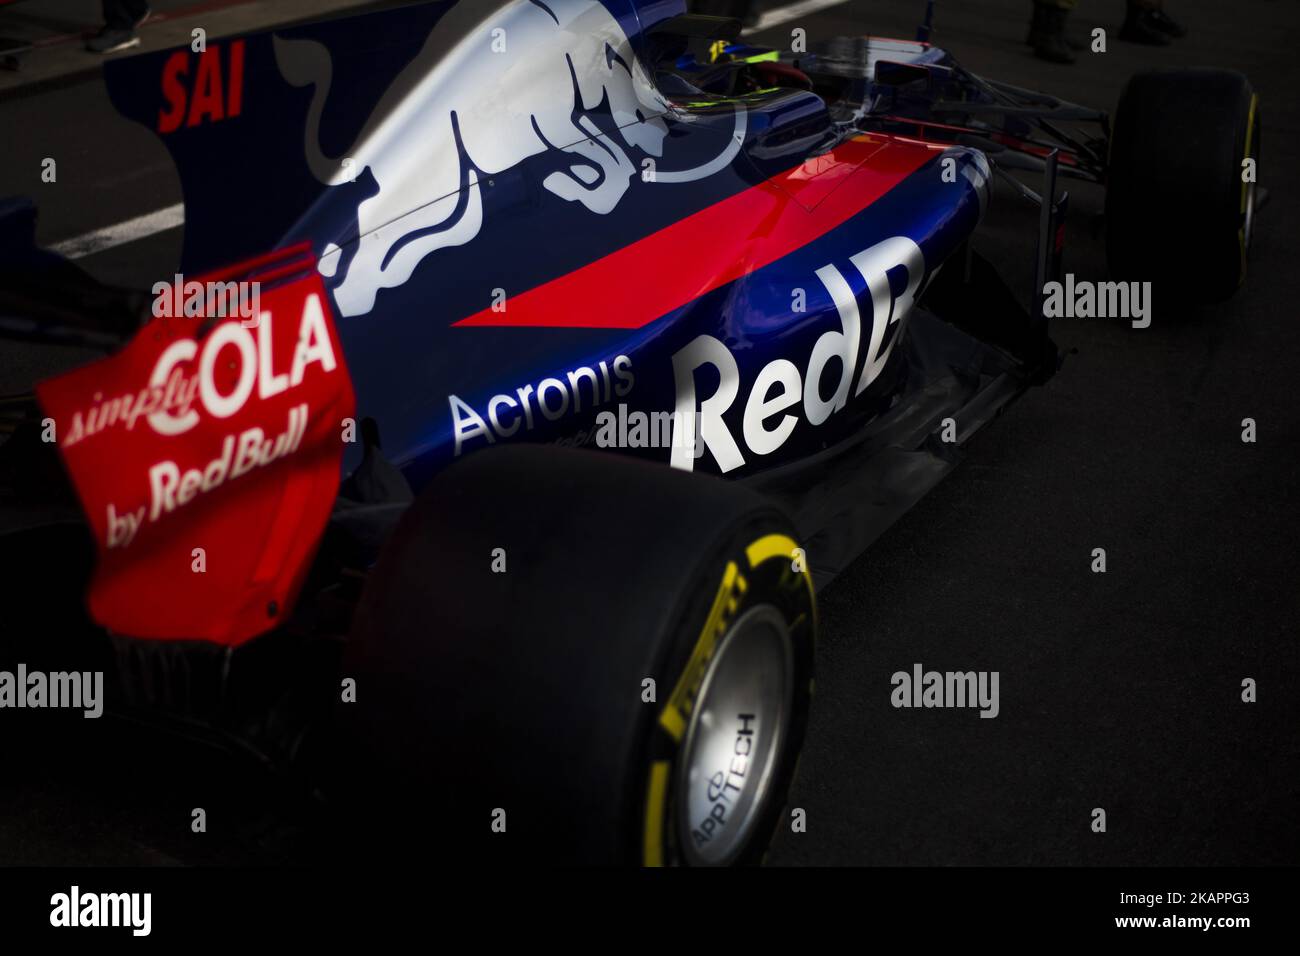 55 SAINZ Carlos from Spain of team Toro Rosso car detail during the Formula One Belgian Grand Prix at Circuit de Spa-Francorchamps on August 24, 2017 in Spa, Belgium. (Photo by Xavier Bonilla/NurPhoto) Stock Photo